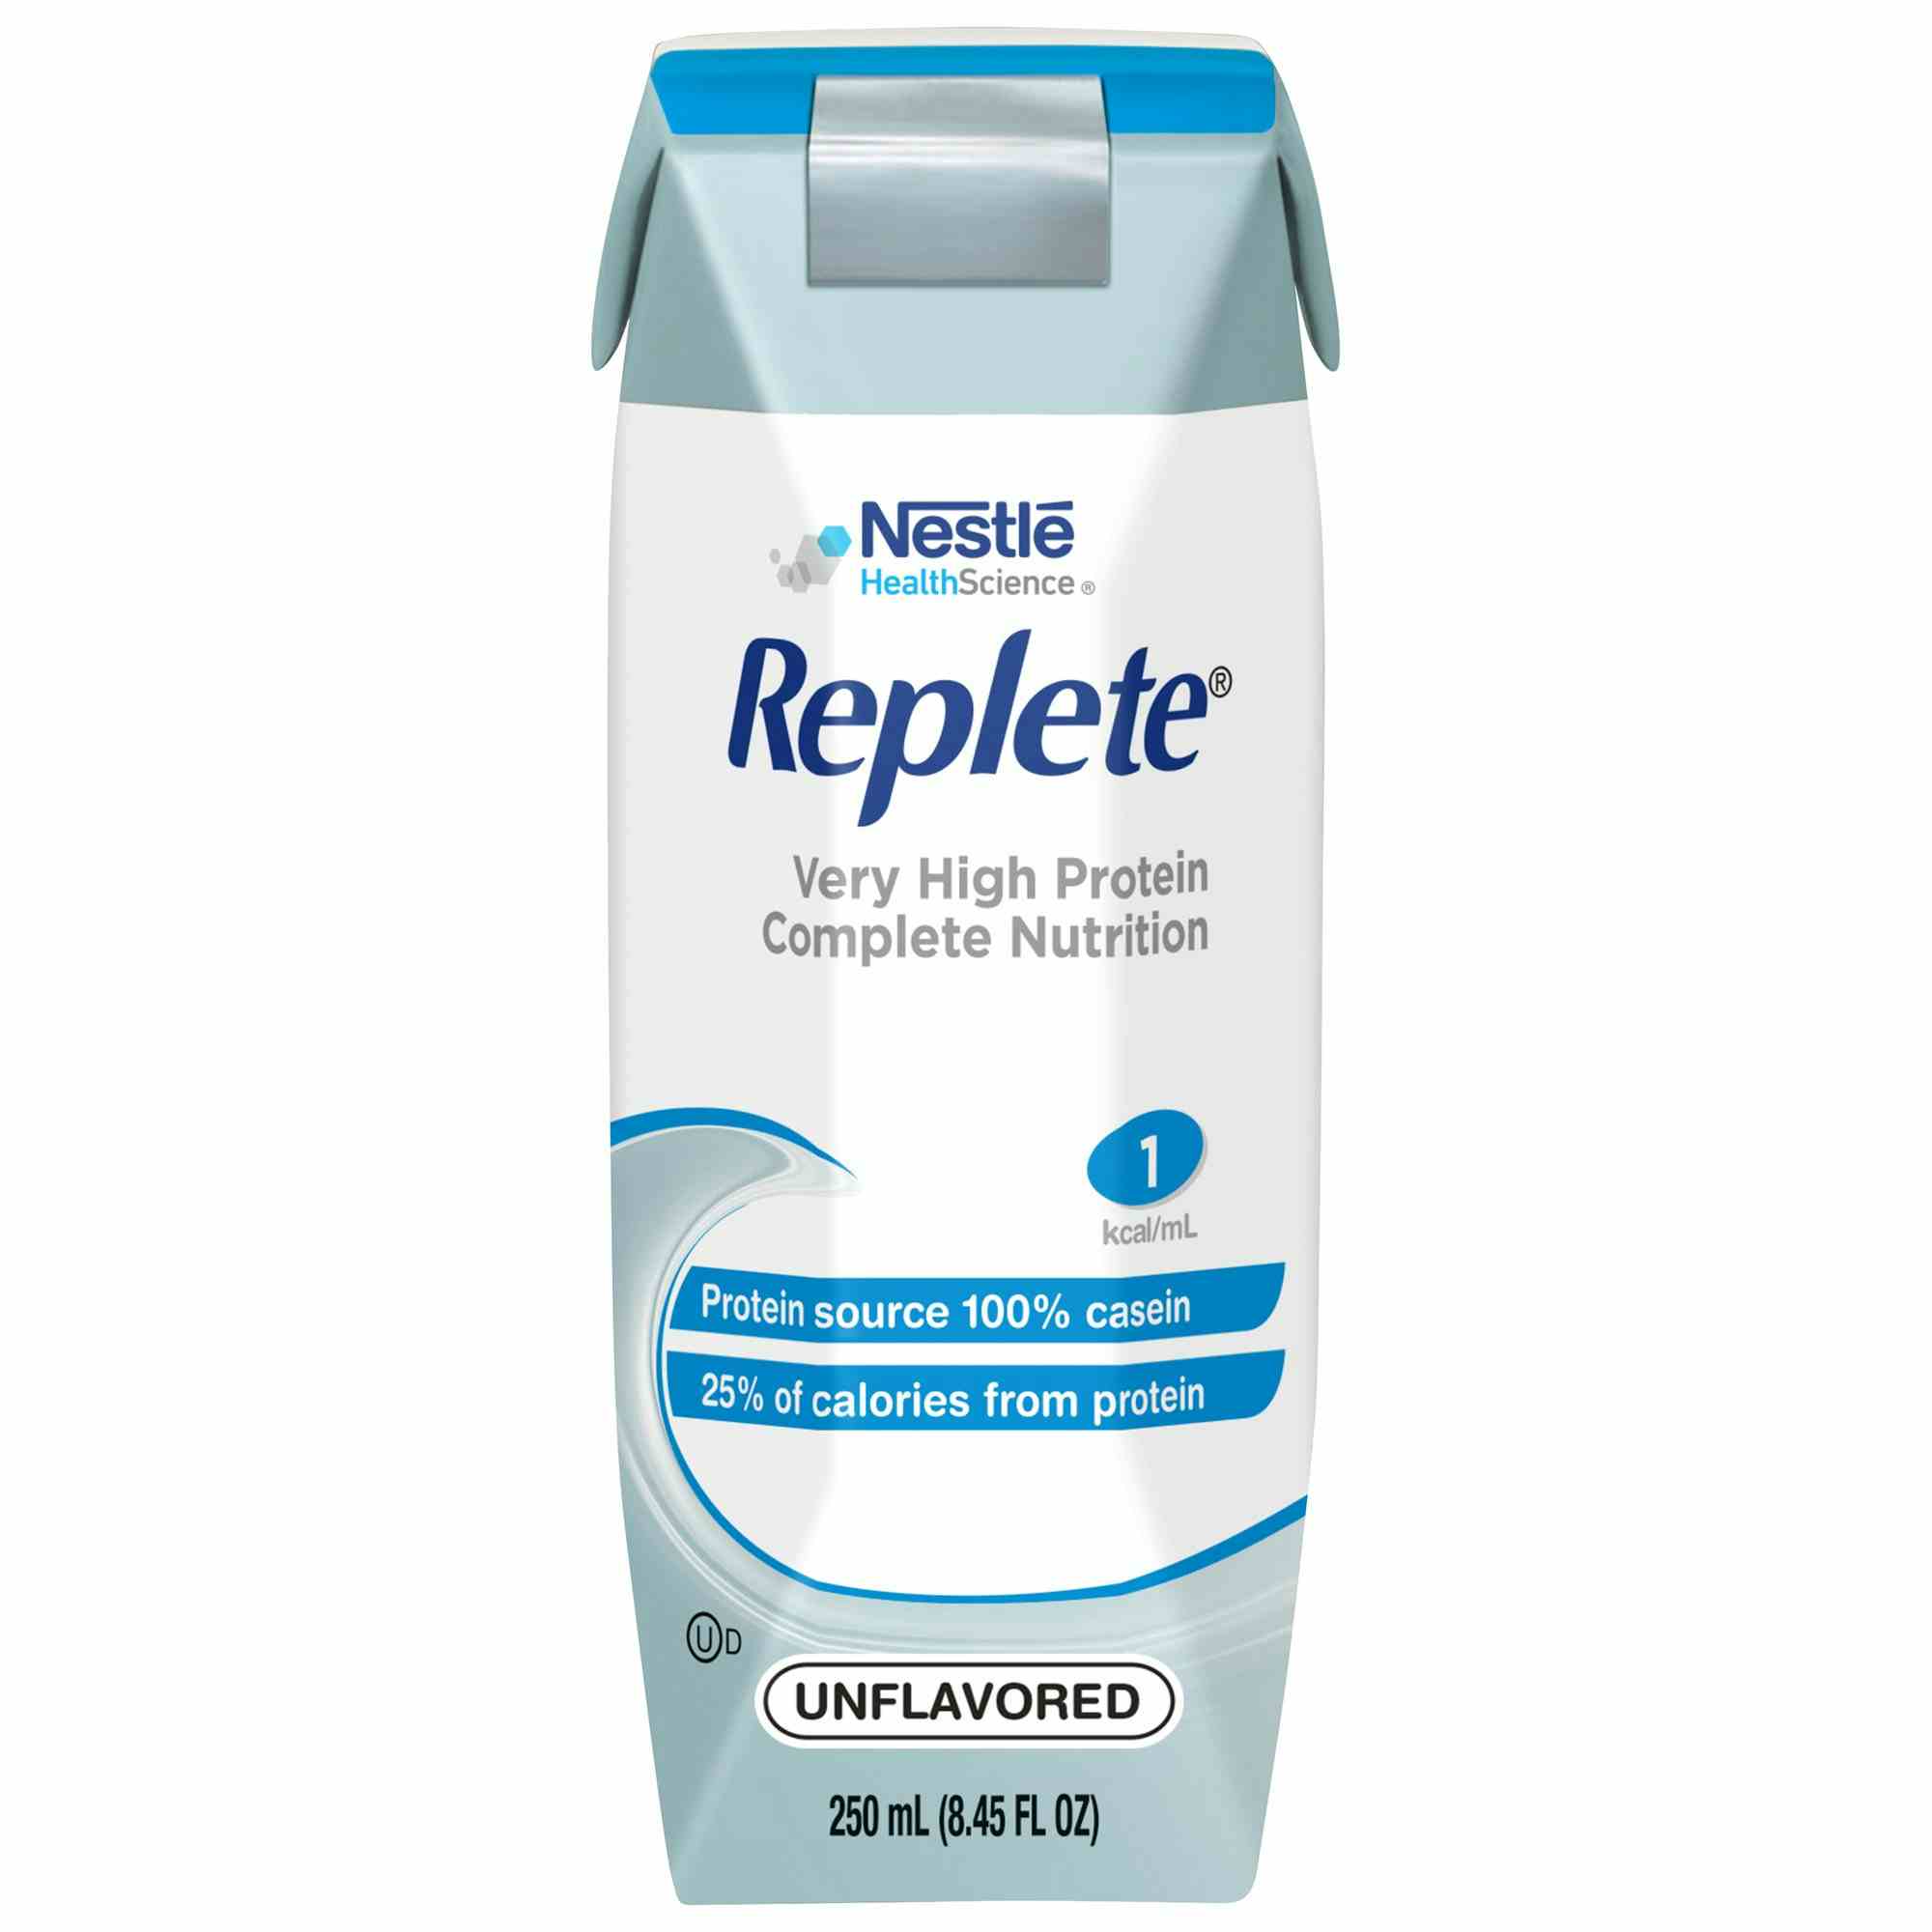 Nestle HealthScience Replete Very High Protein Complete Nutrition Tube Feeding Formula, 8.45 oz. , 00798716162494, Case of 24